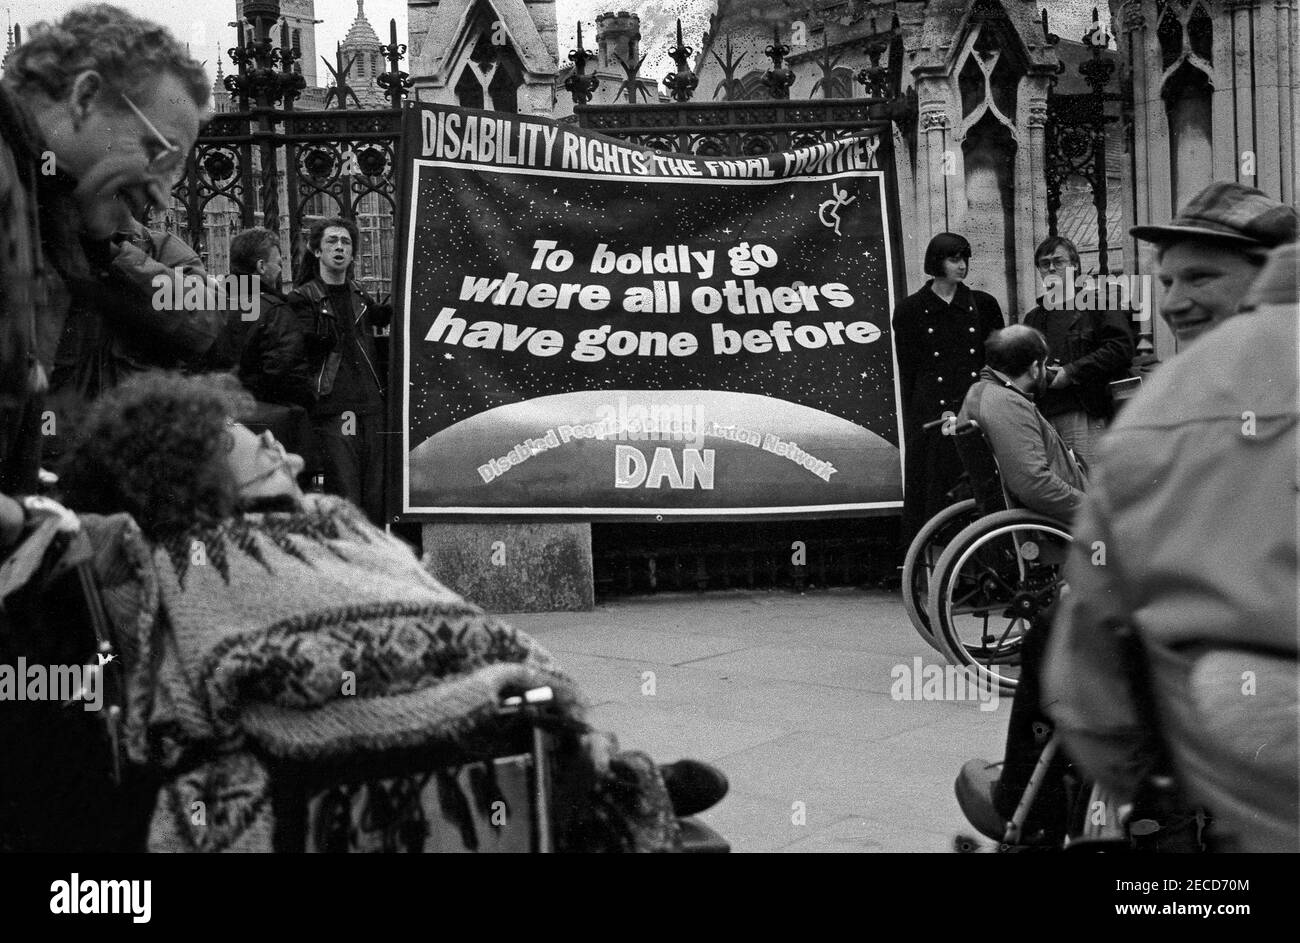 Wheelchair users from DAN (Disabled Action Network) protest outside Parliament as part of a series of protests about lack of disabled persons access to public transport, in the lead up to the Disability Discrimination Act being debated in Parliament, February 1995 Stock Photo